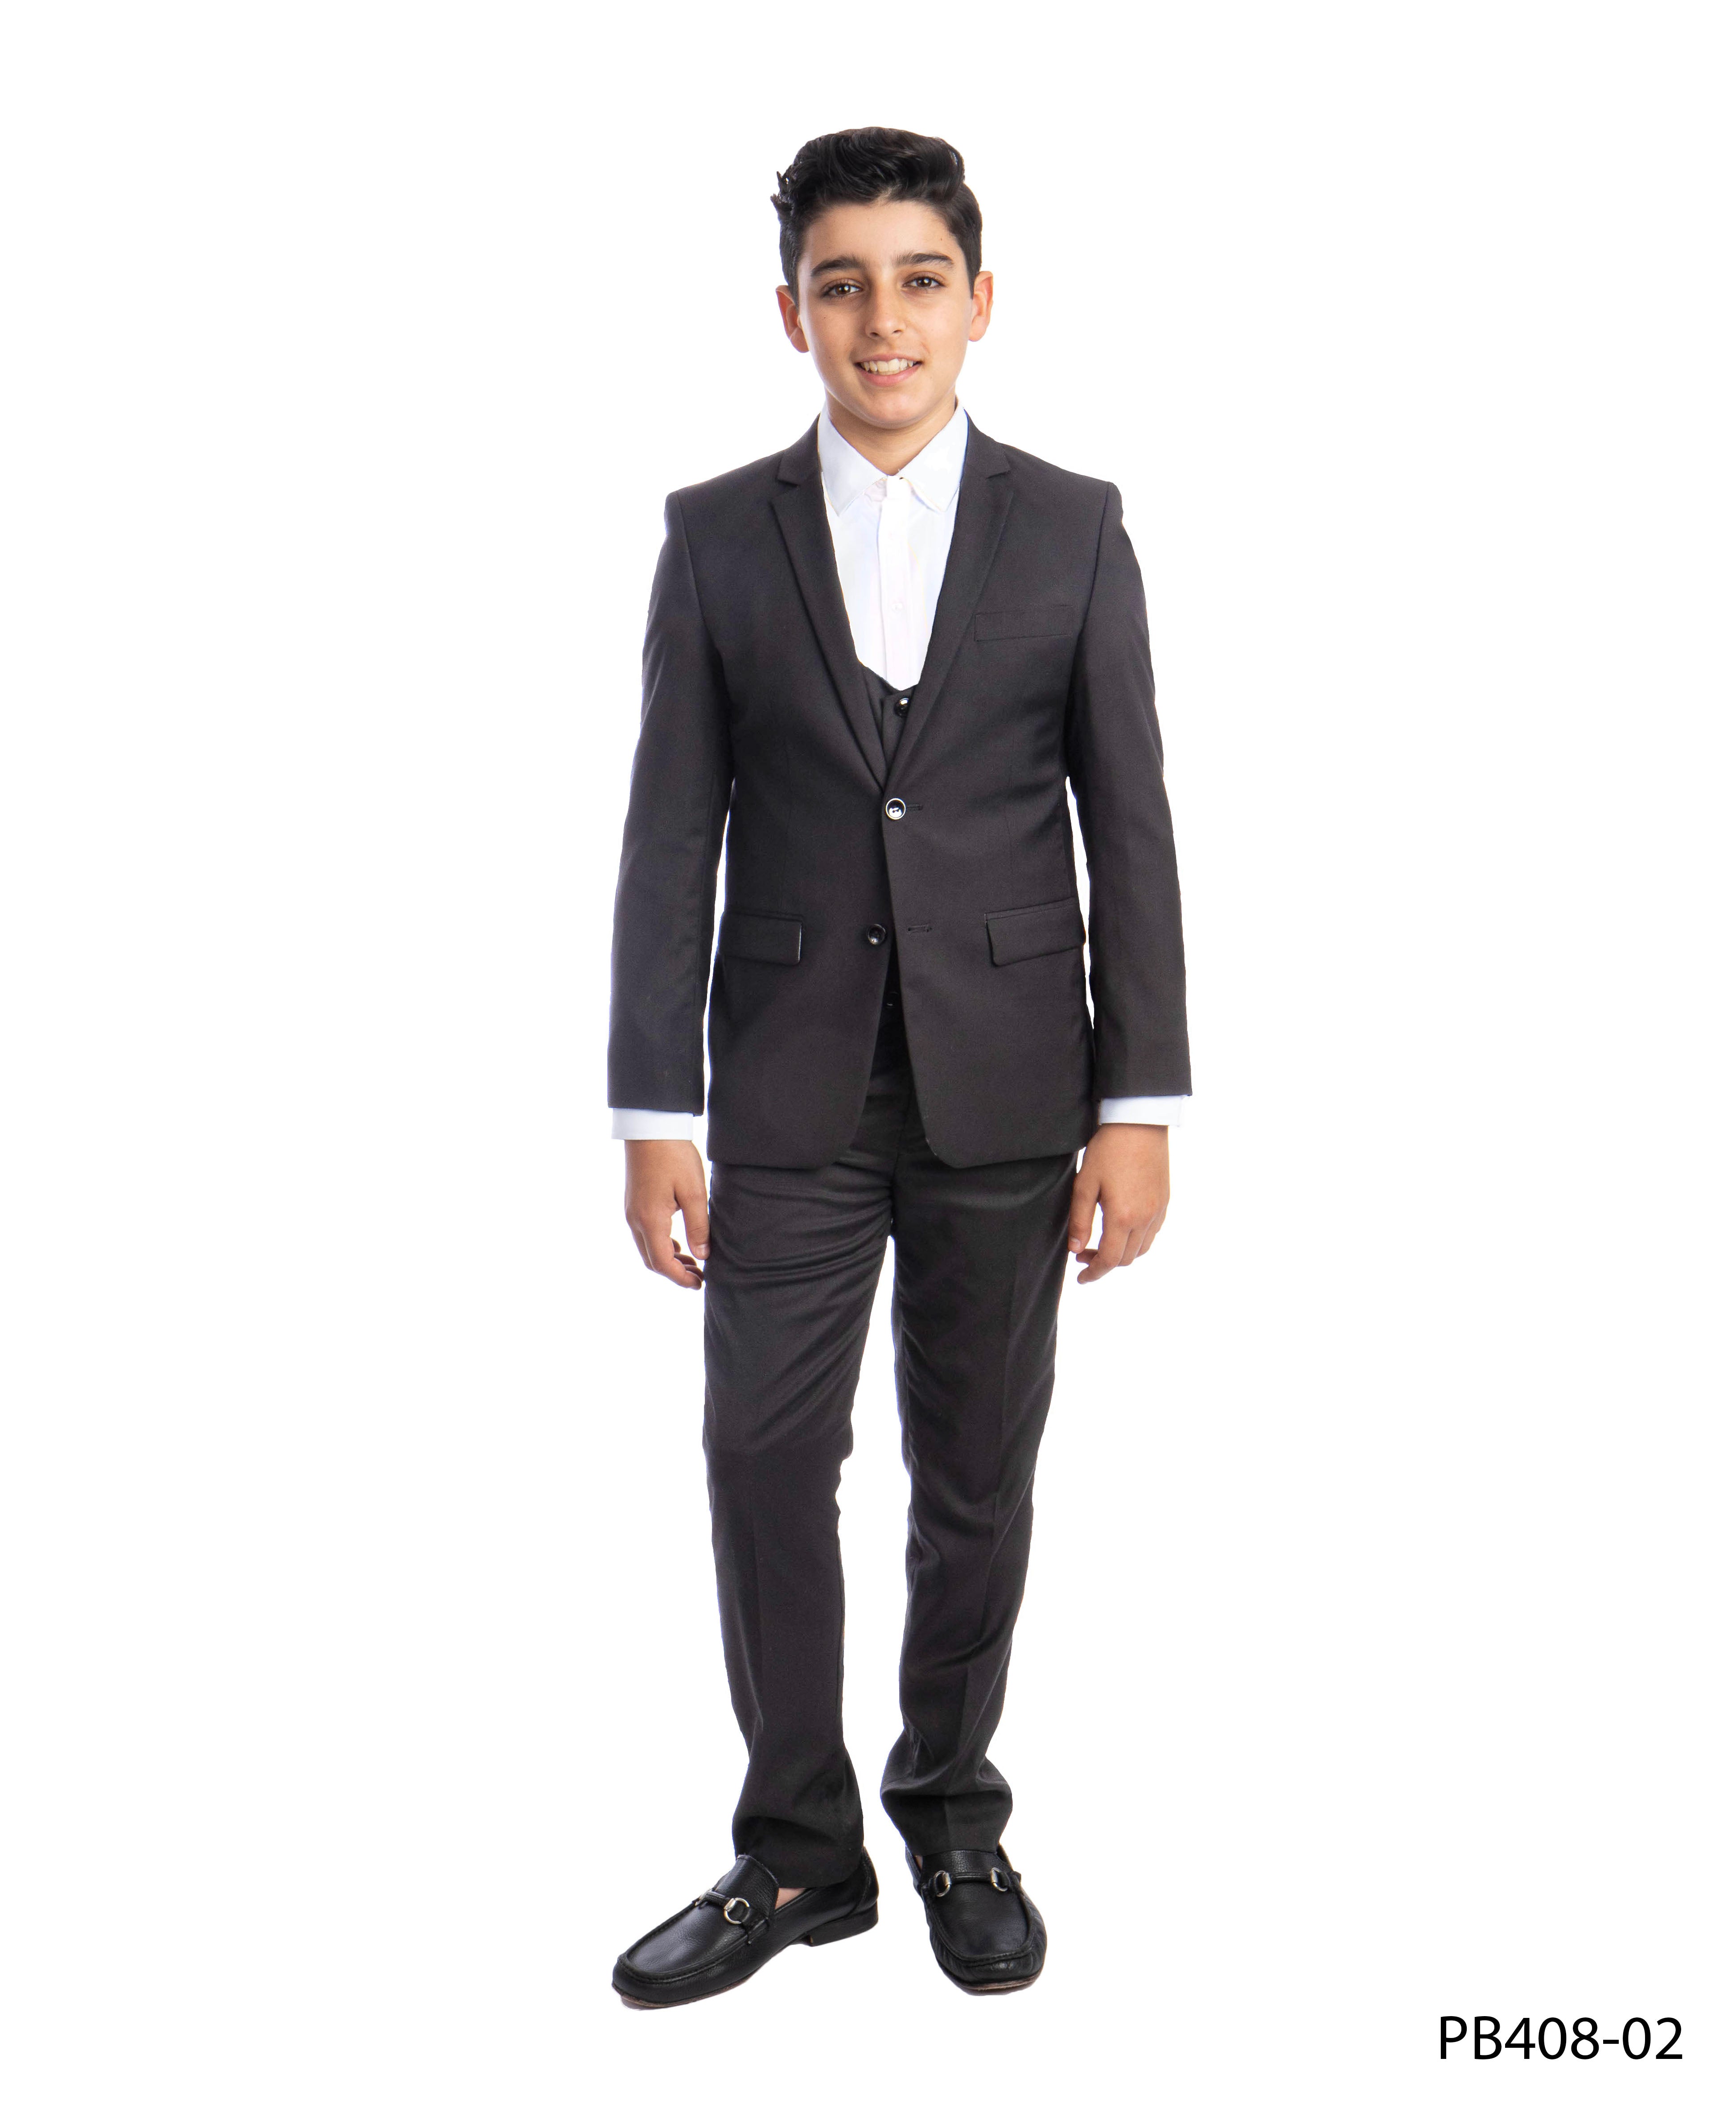 Grey 3 Piece Perry Ellis Suits For Boys PB408-02